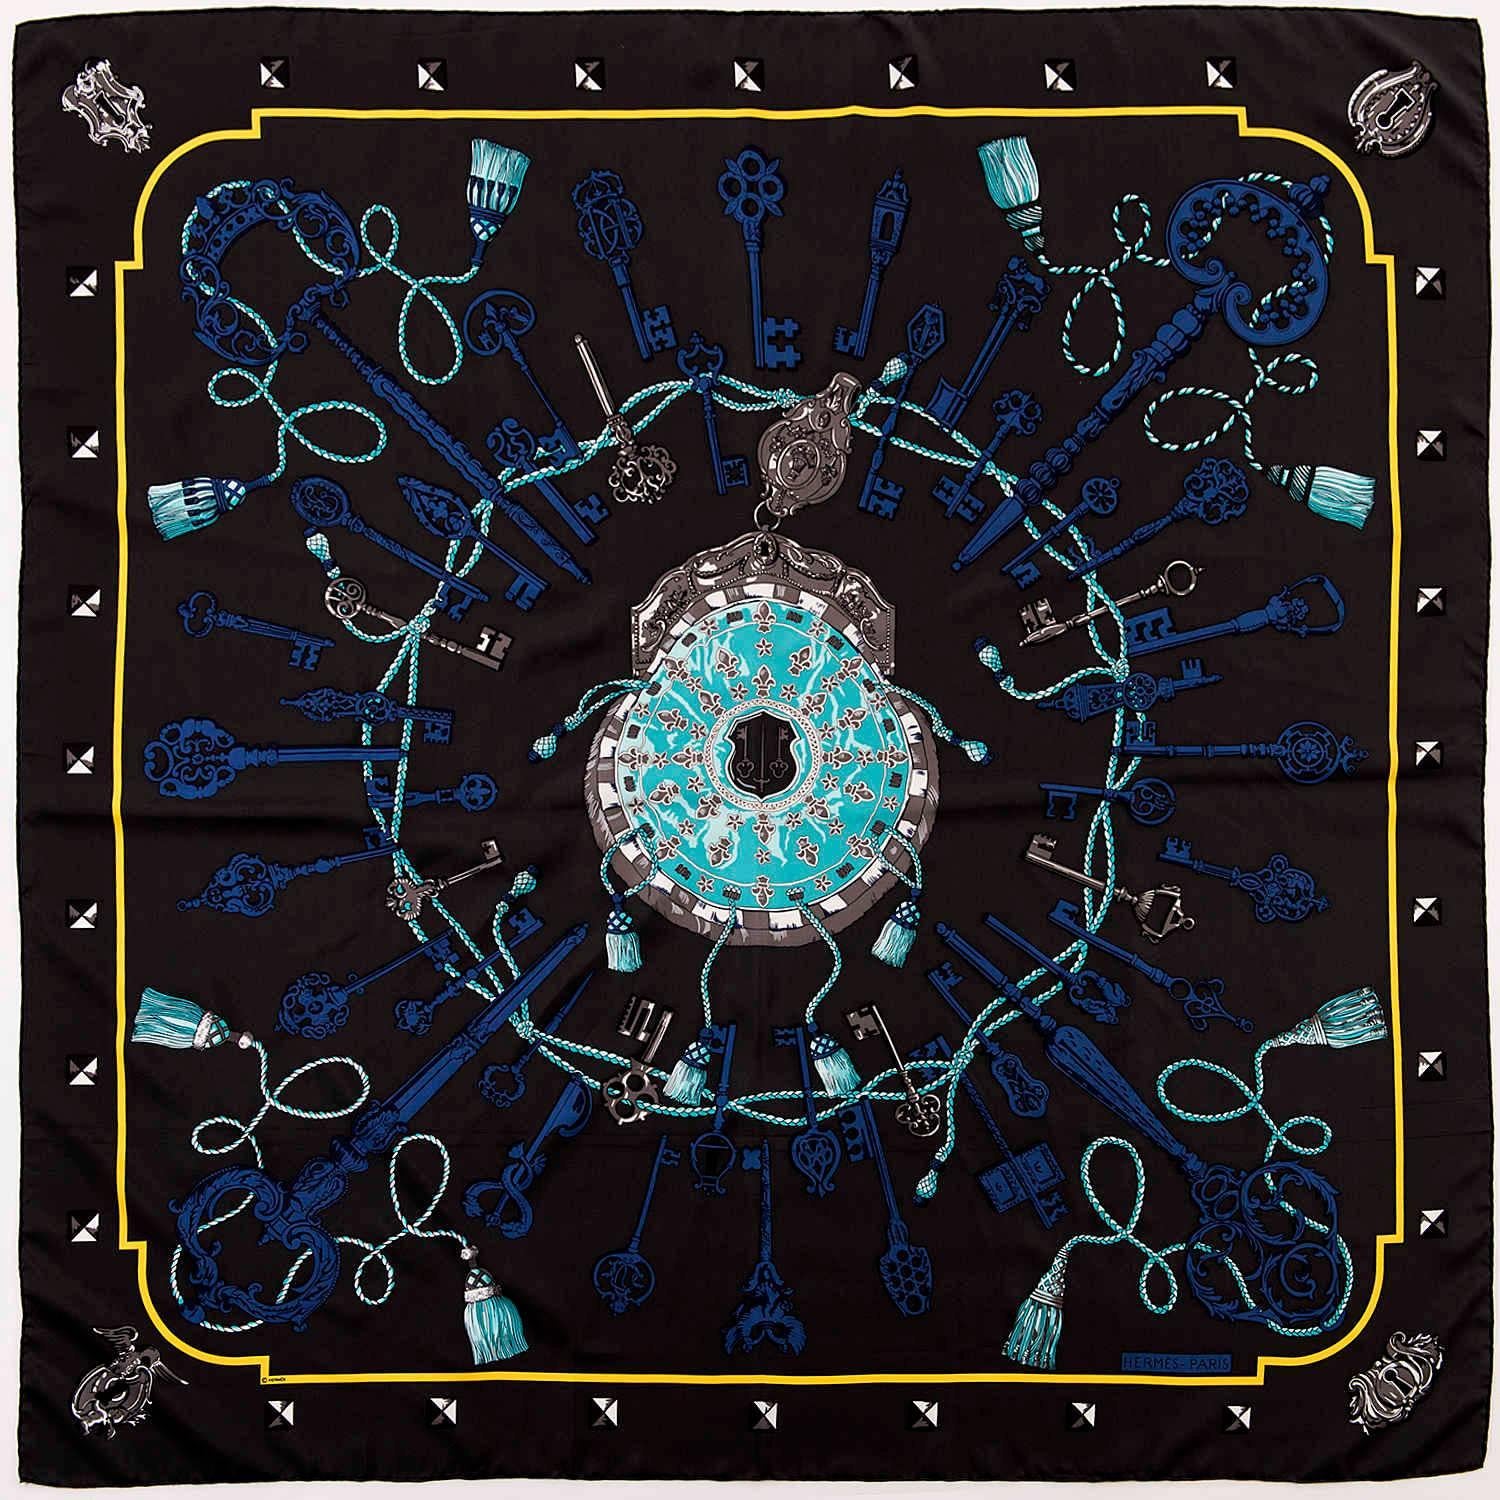 'Les Clefs' is a truly beautiful Hermes silk shawl, designed by the famous Hermes Designer Caty Latham in 1965.  In pristine 'store-fresh' condition, this design is now unavailable to buy in Hermes stores. On a grey/black ground, overlaid with a